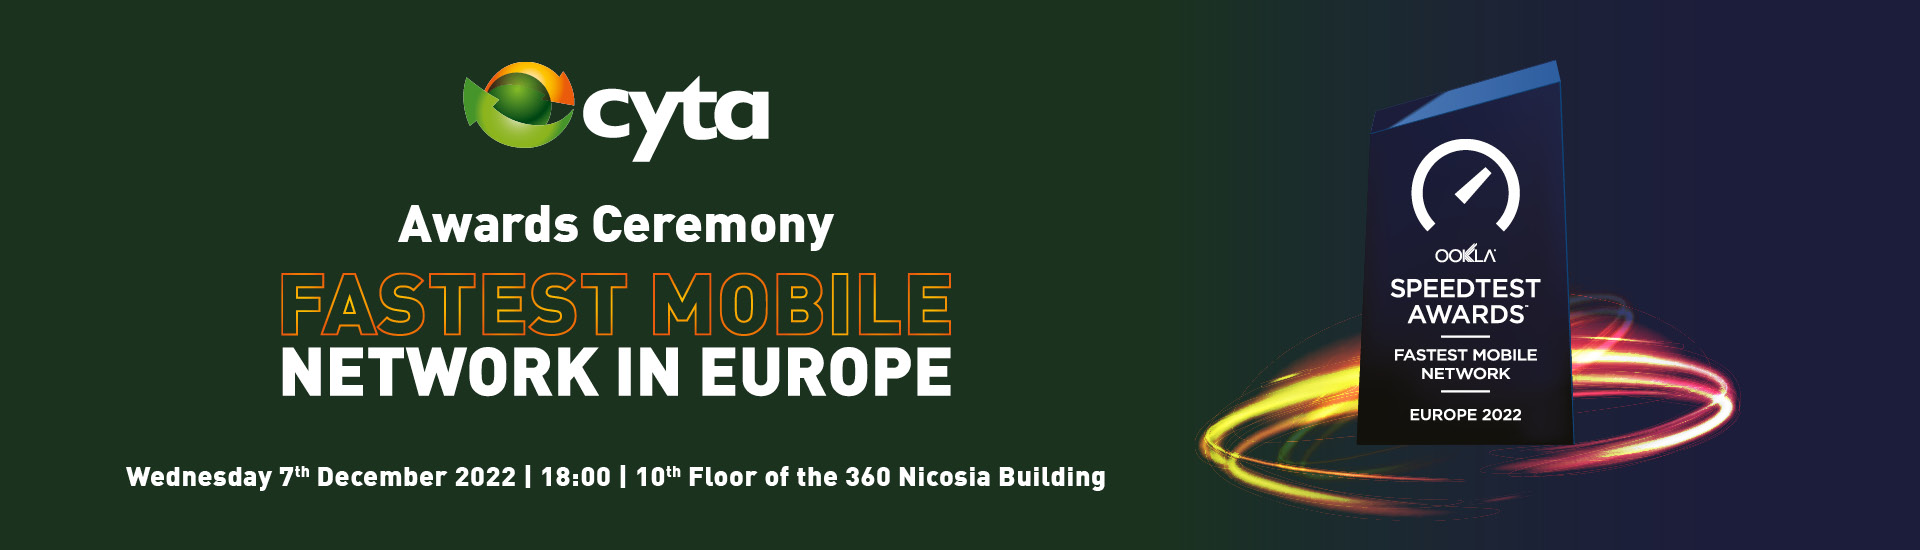 Fastest Mobile Network in Europe Awards Ceremony by Cyta